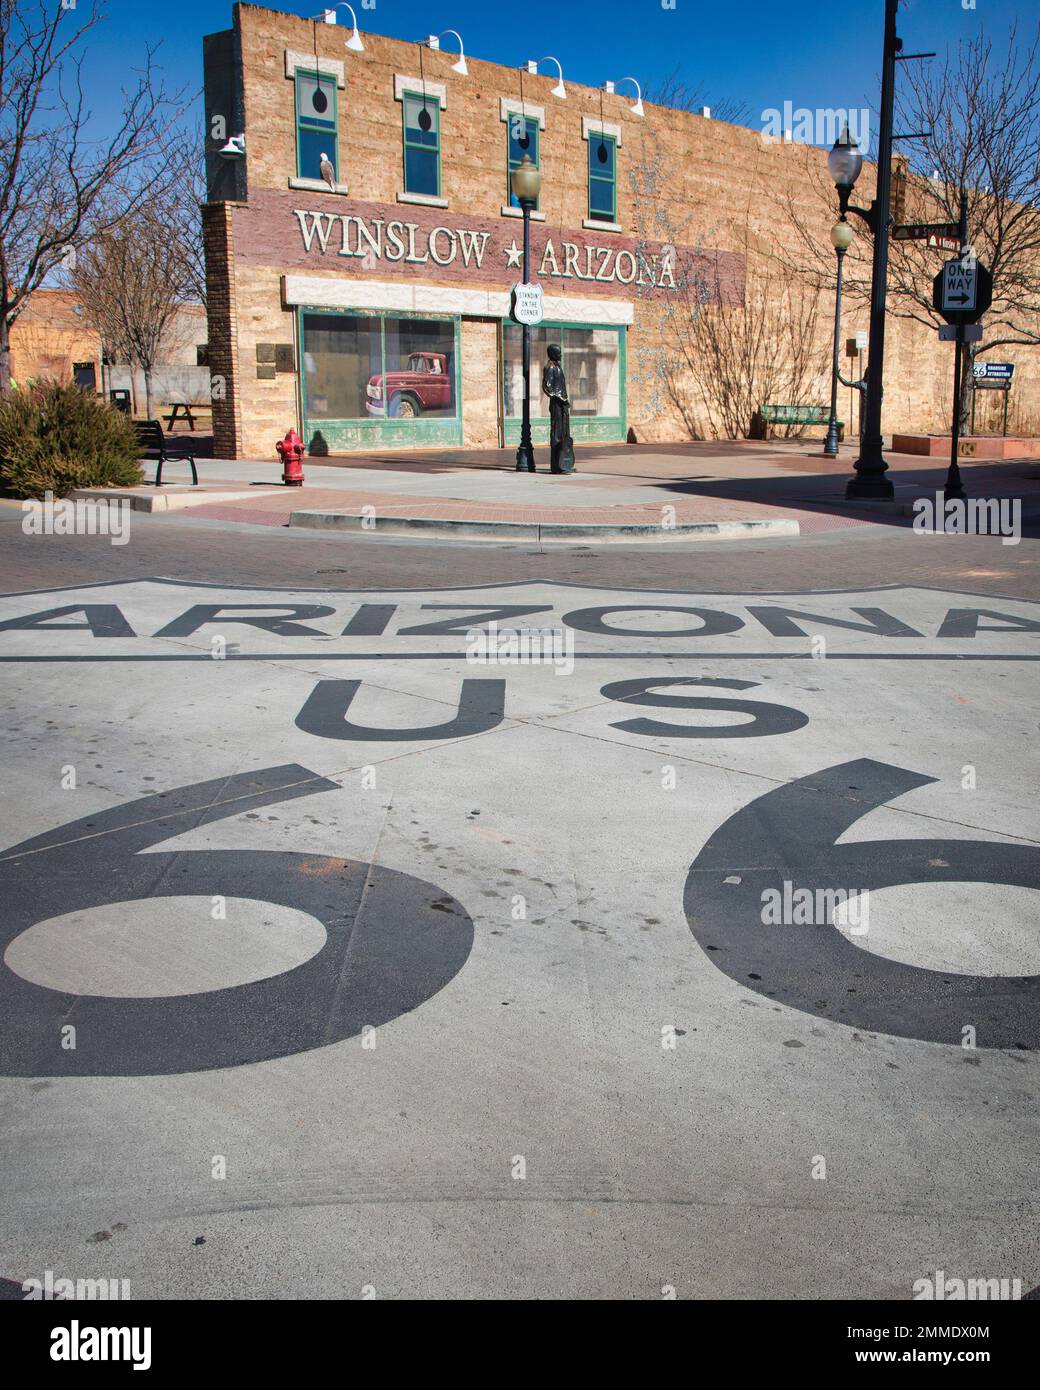 A celebration of a corner referenced by the music group Eagles song in Winslow, Arizona. Stock Photo